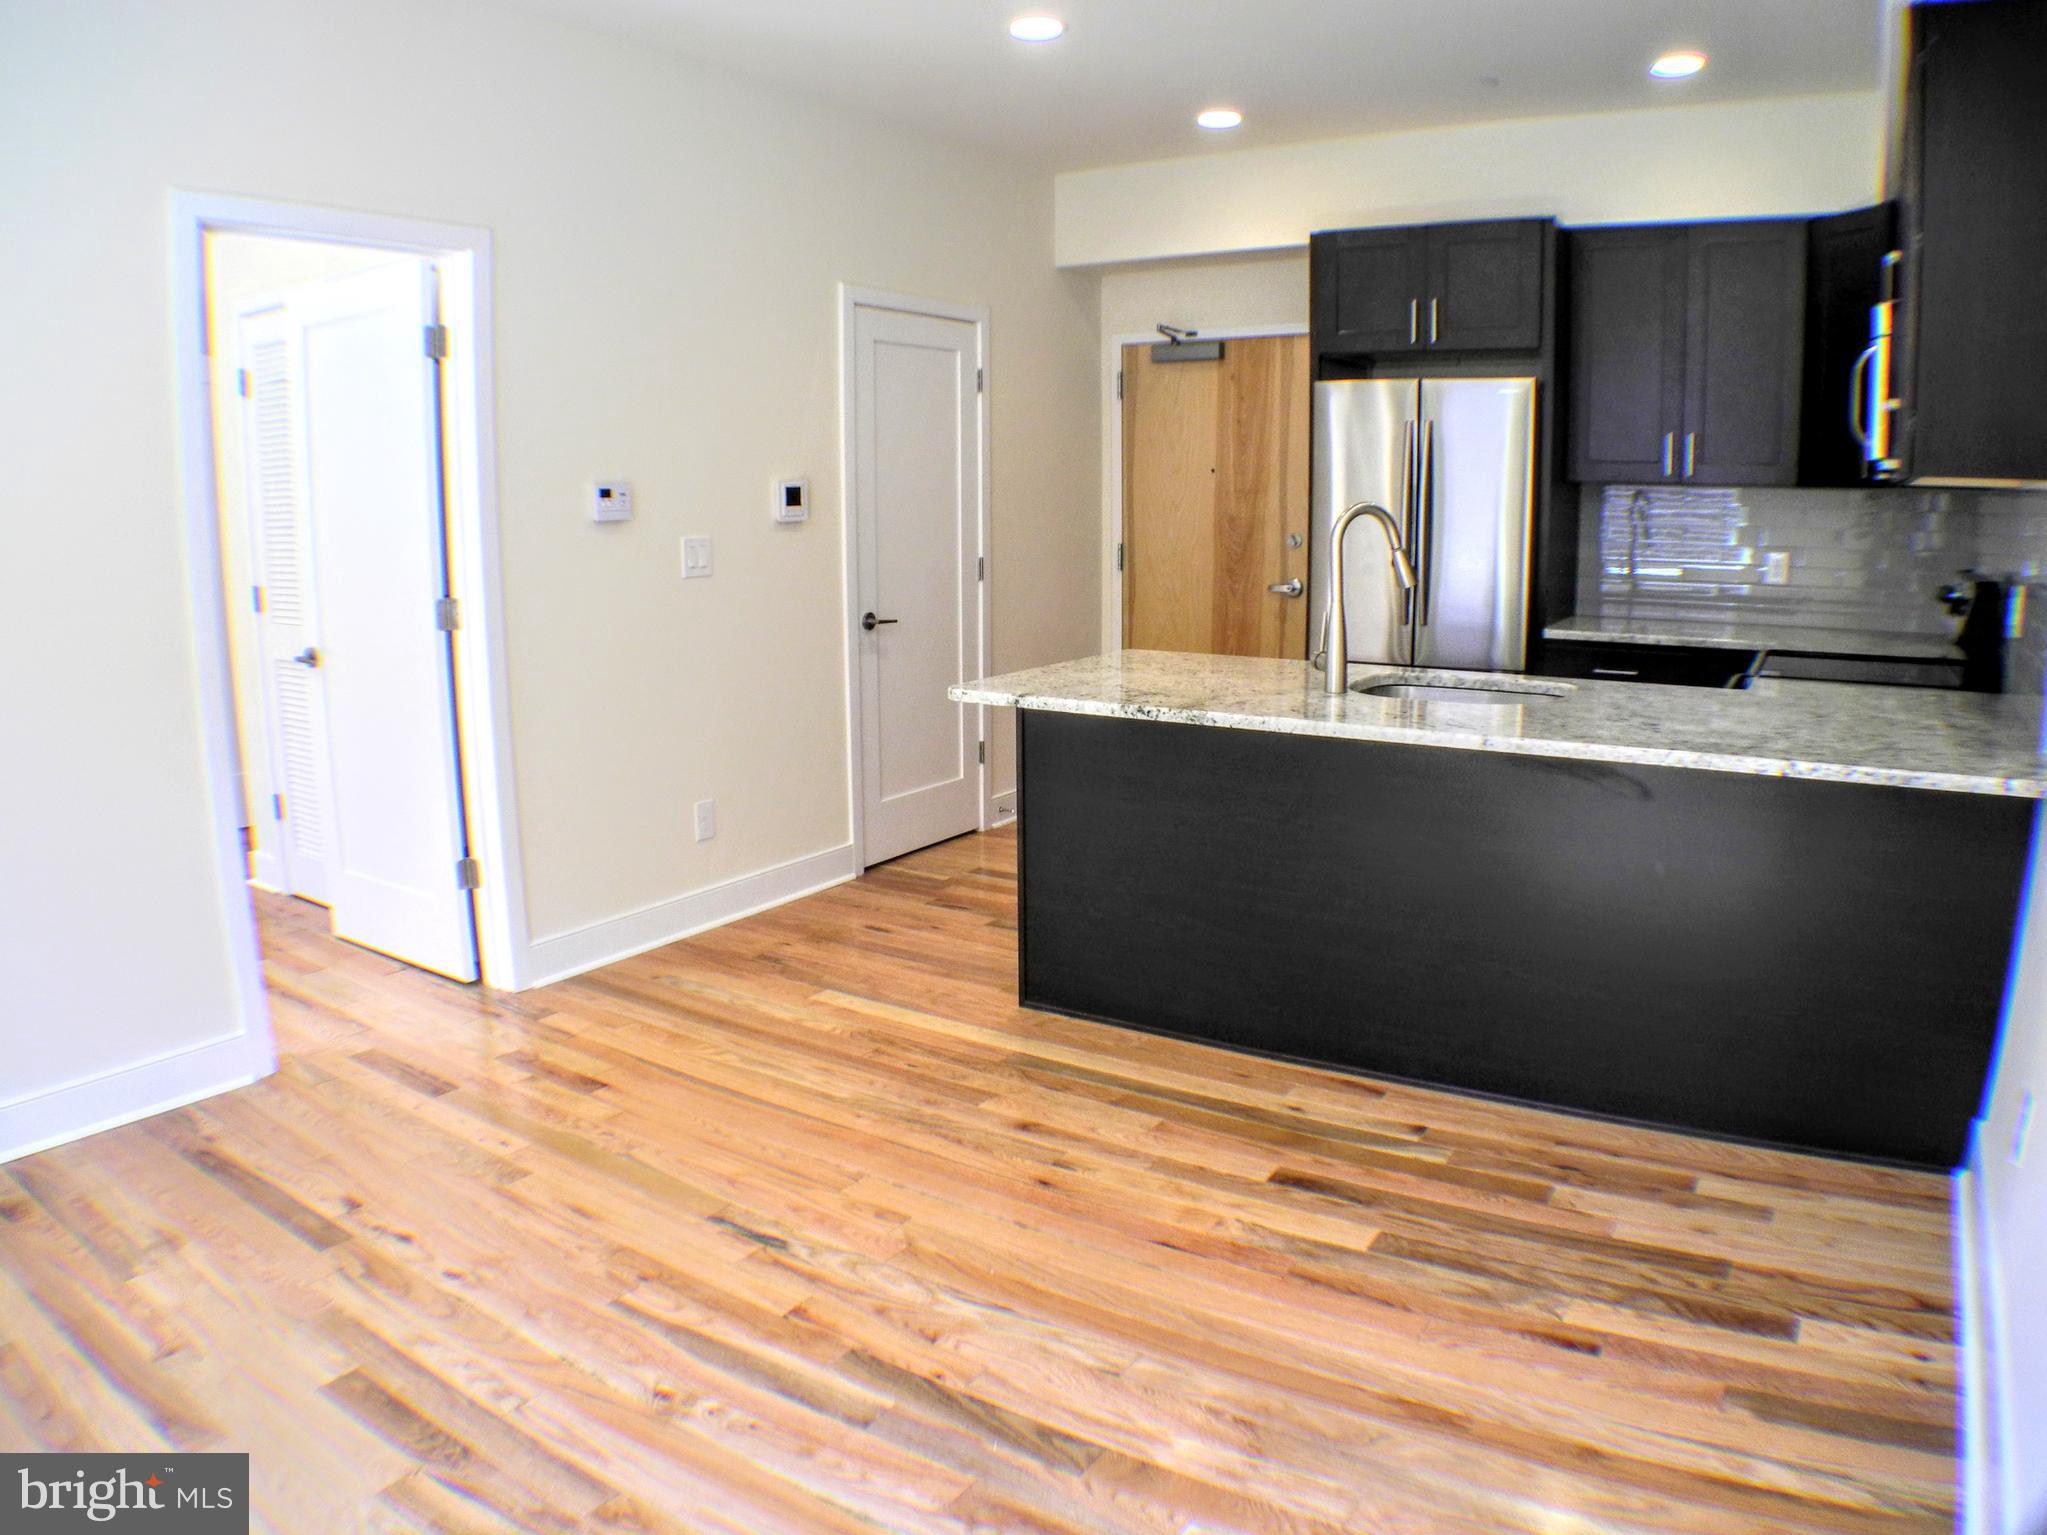 a view of kitchen with stainless steel appliances wooden cabinets and entryway